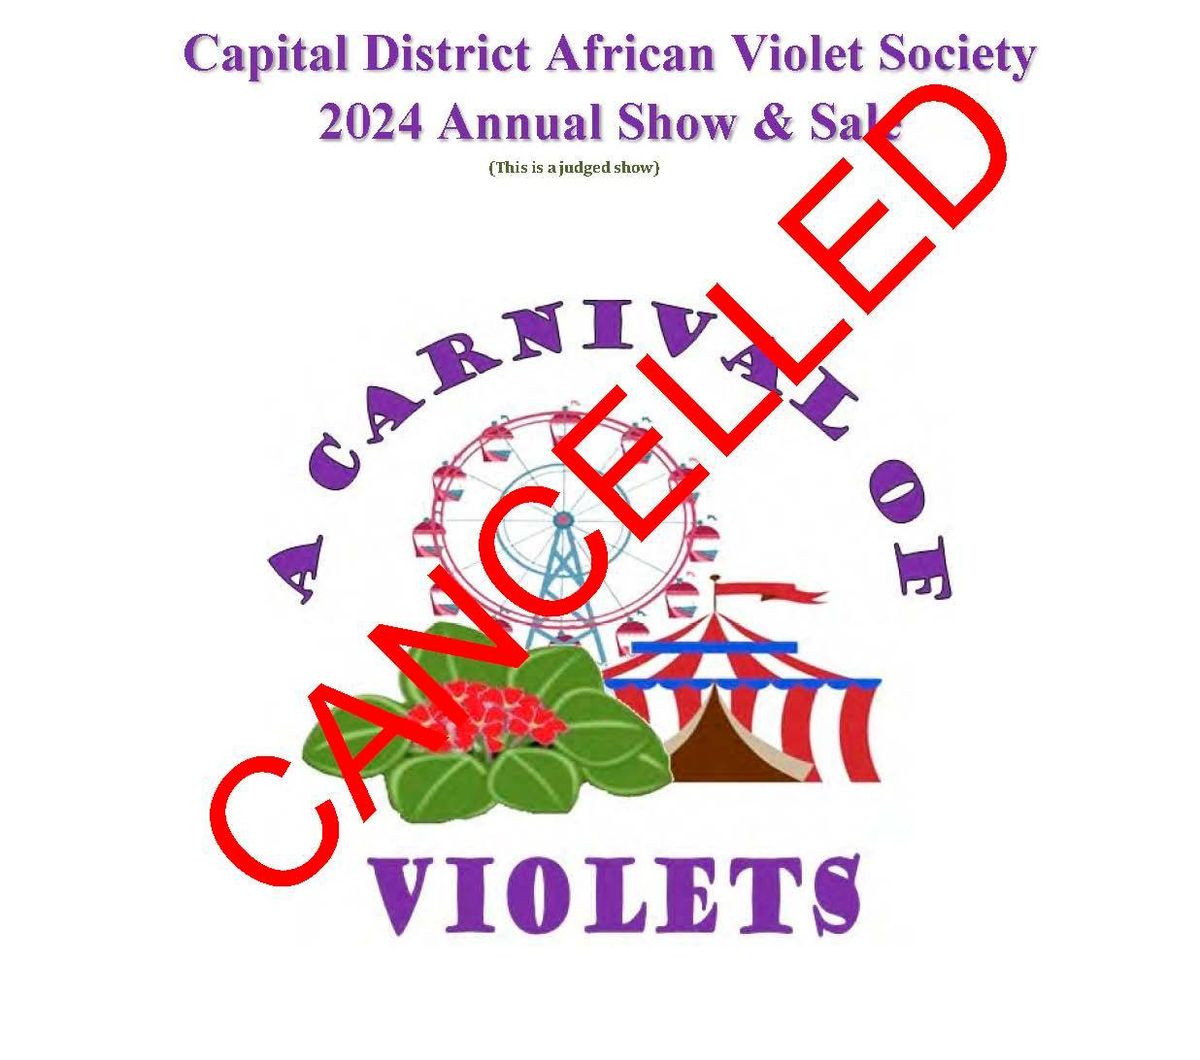 Capital District African Violet Society Annual Show and Sale - CANCELLED